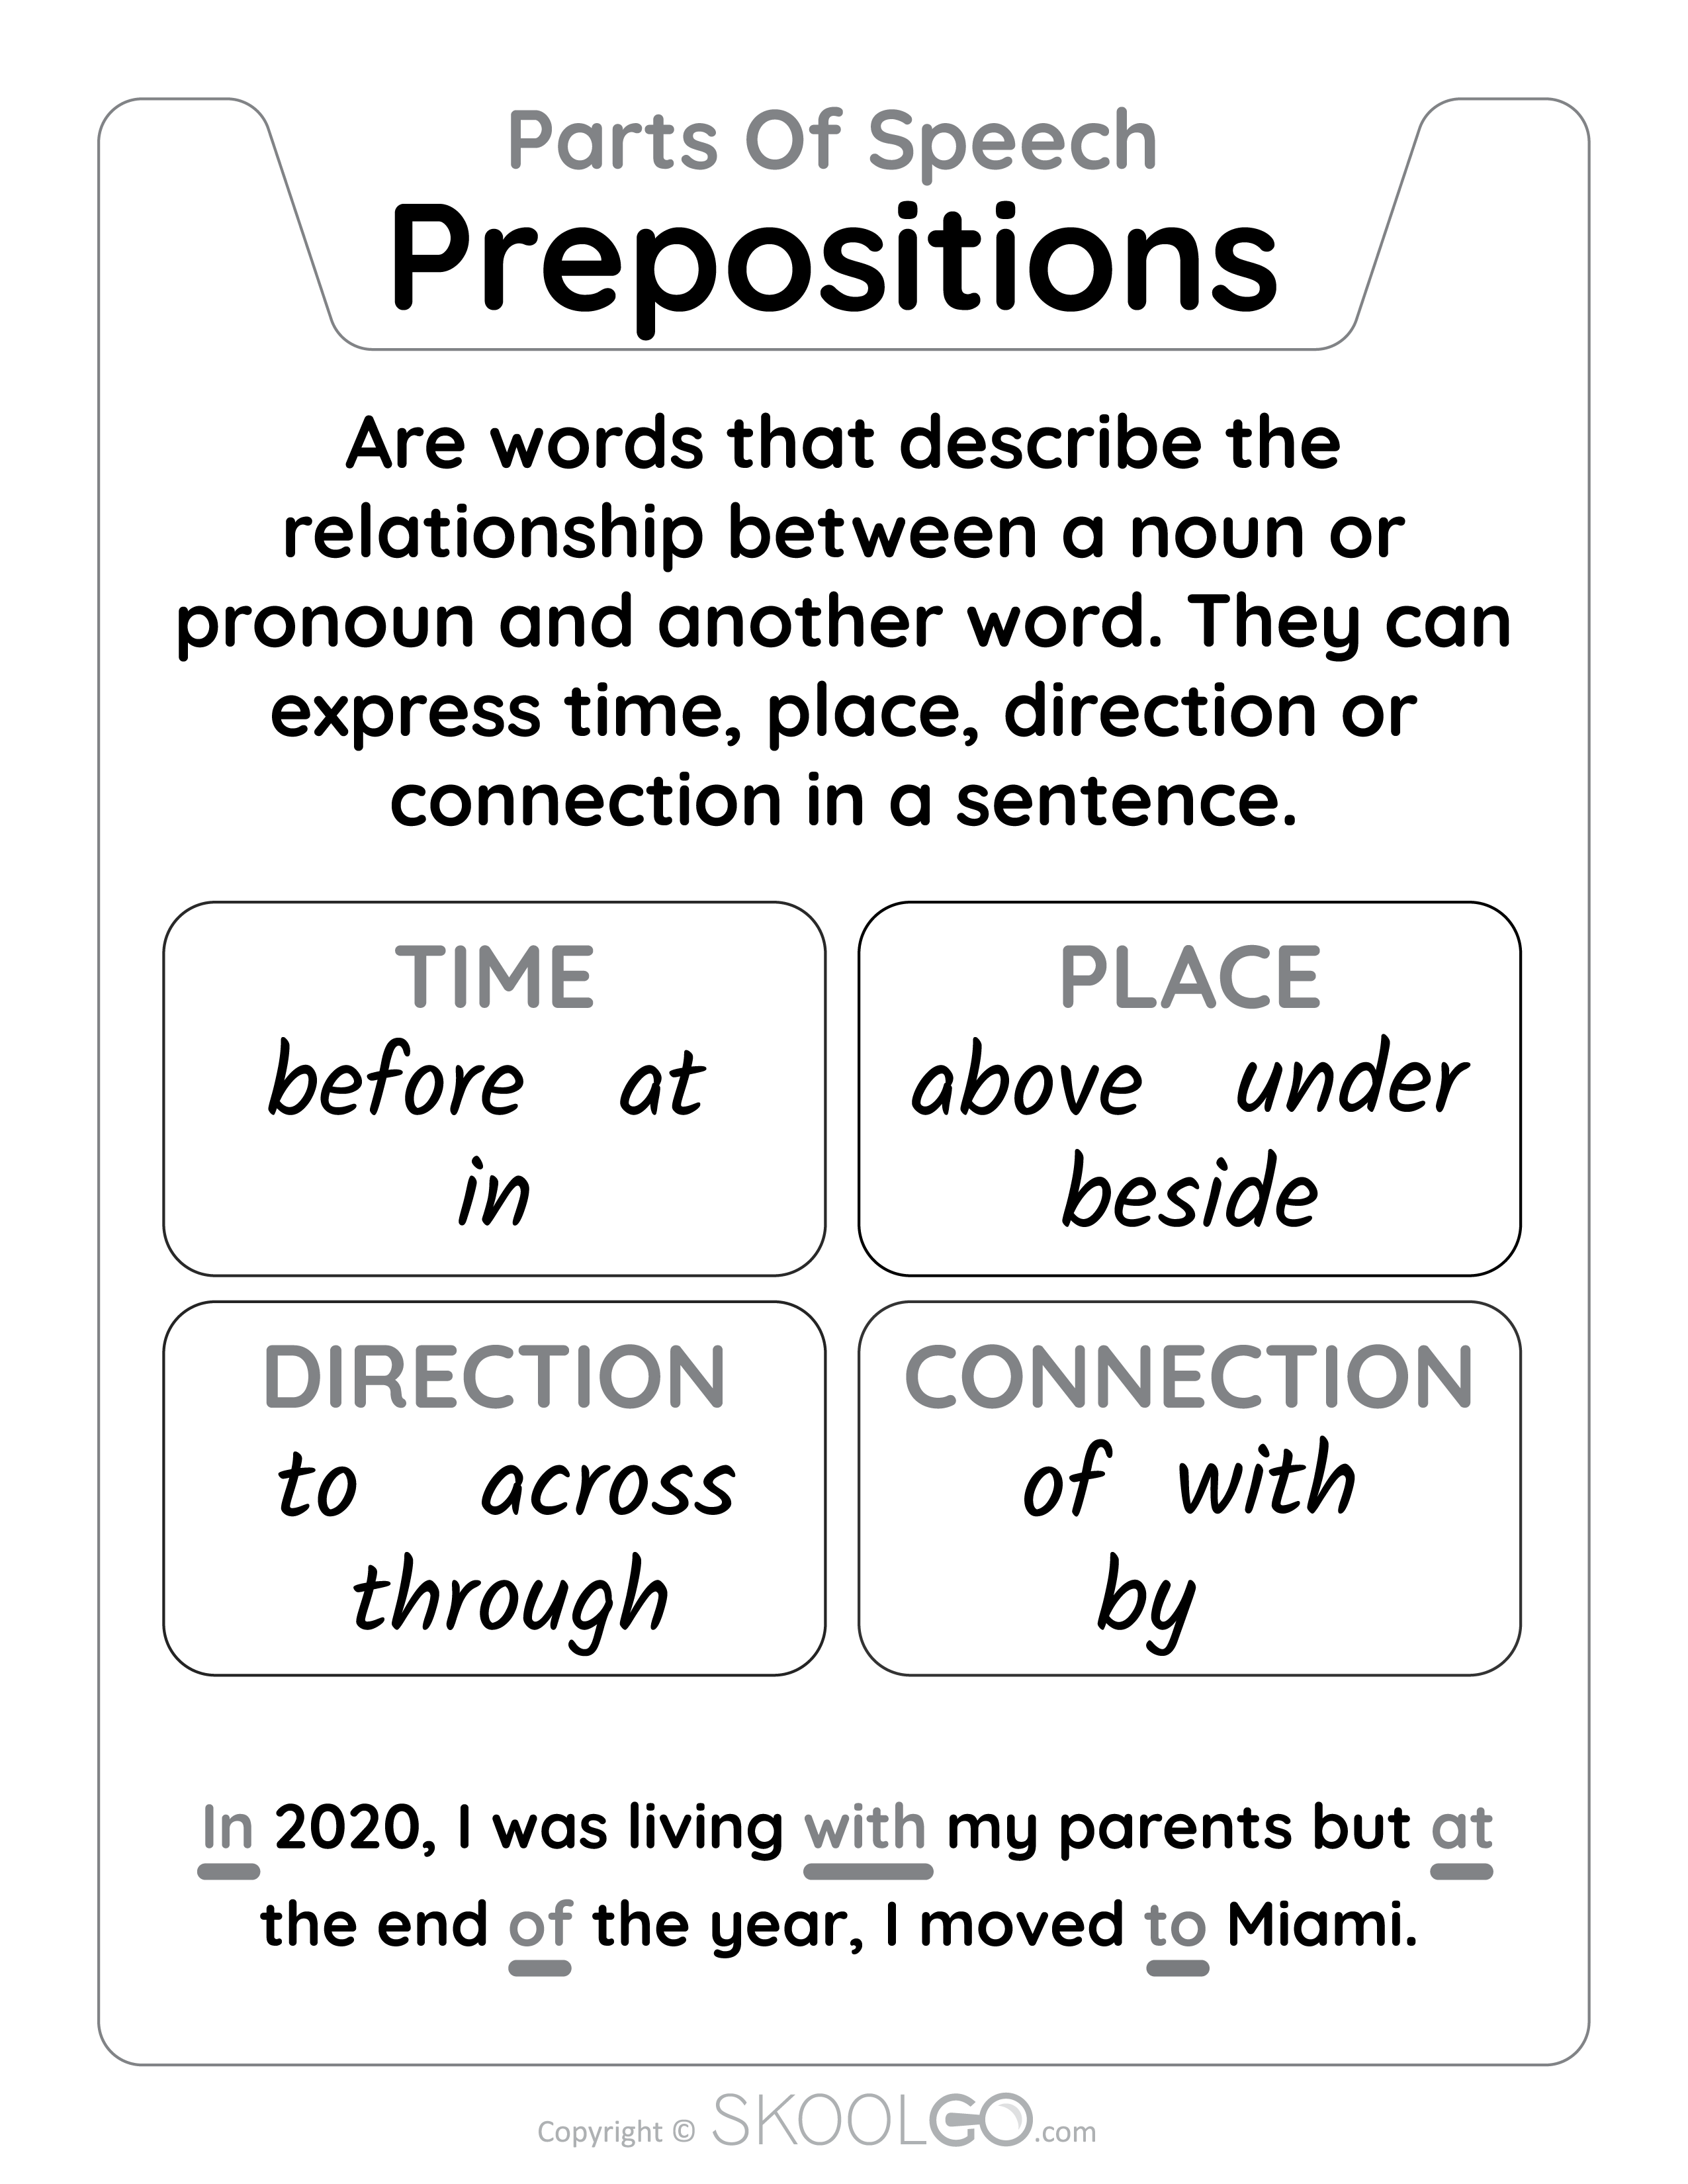 Prepositions - Parts Of Speech - Free Learning Classroom Poster